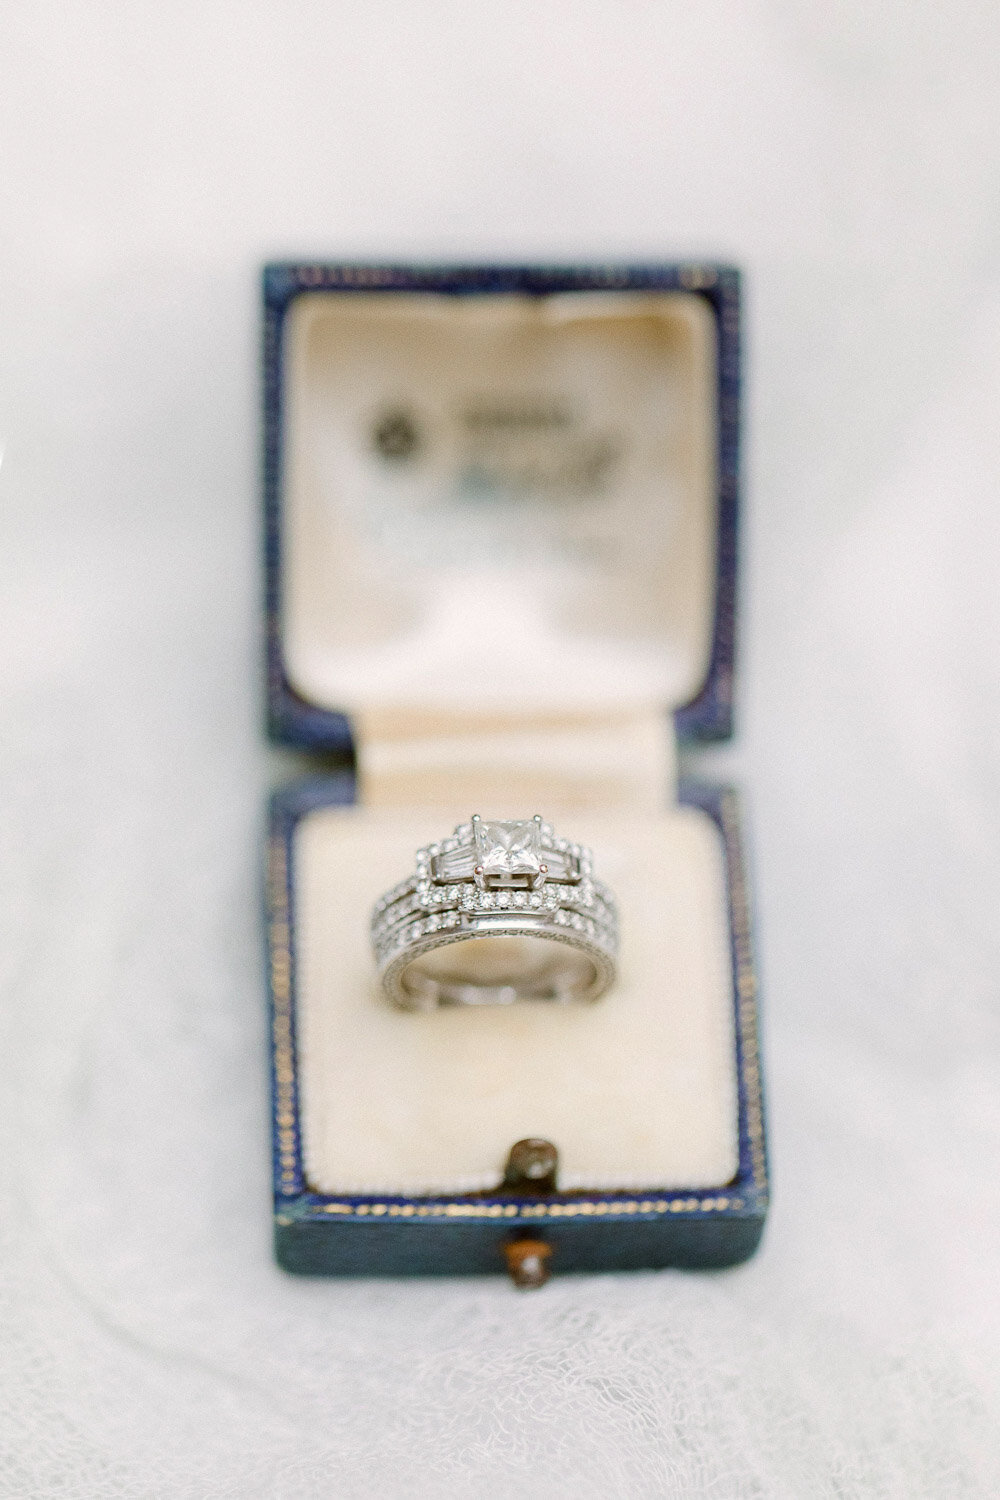 Old and luxury wedding ring